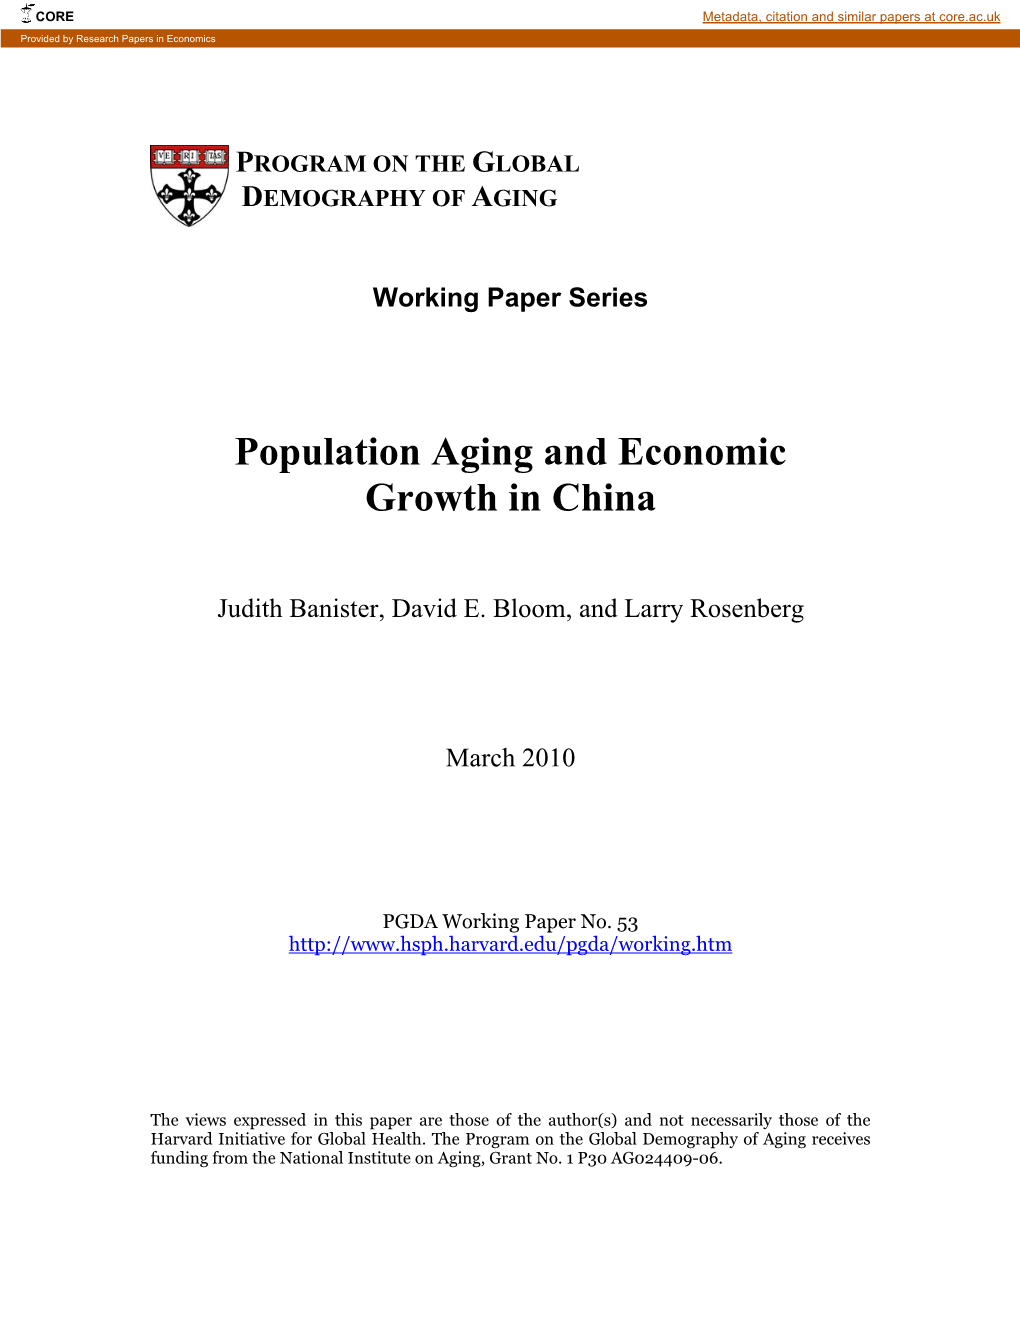 Population Aging and Economic Growth in China